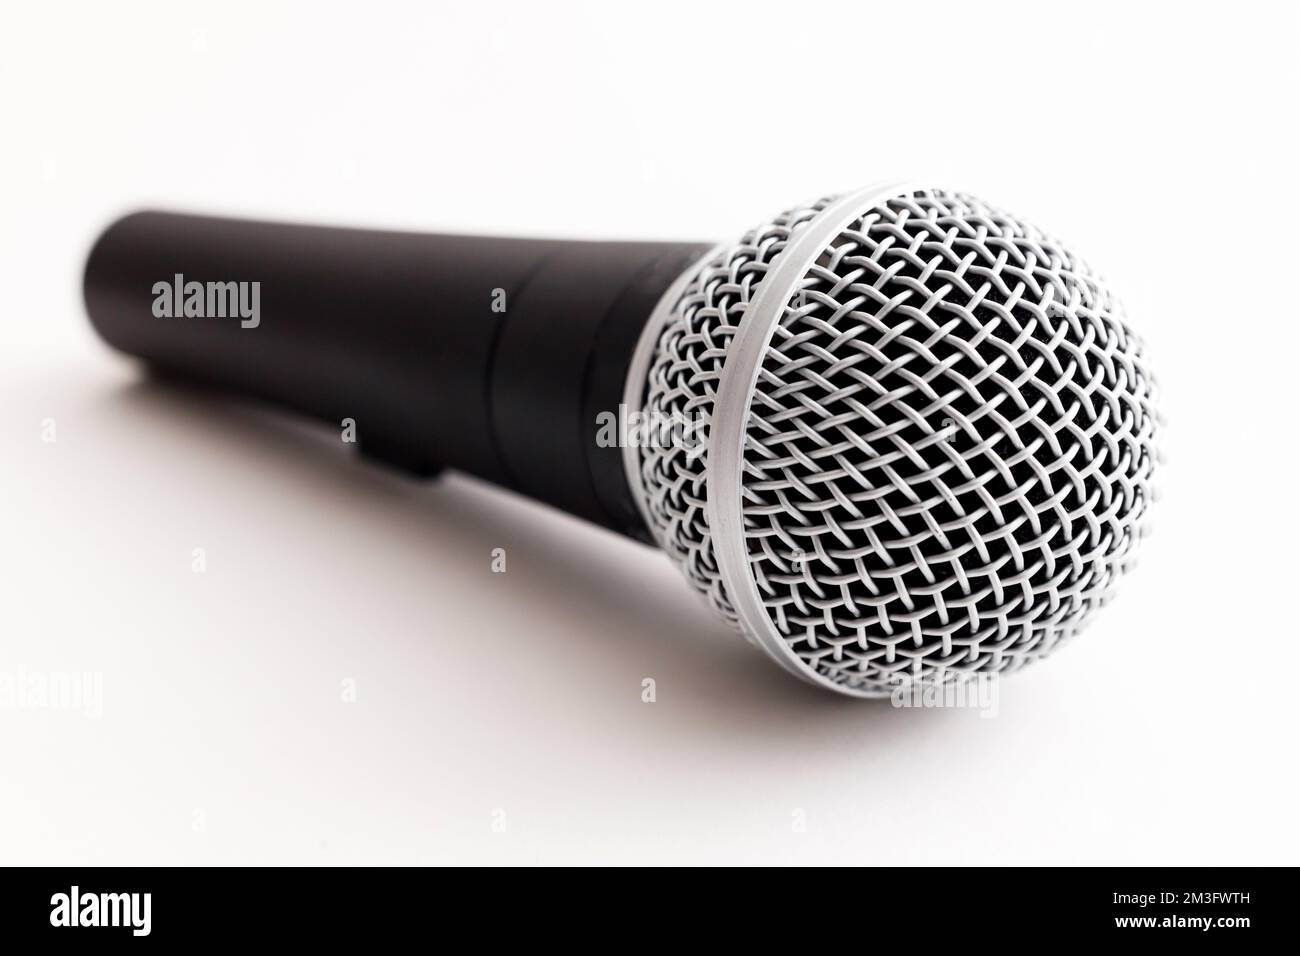 Vocal Microphone on white background, mock up Stock Photo